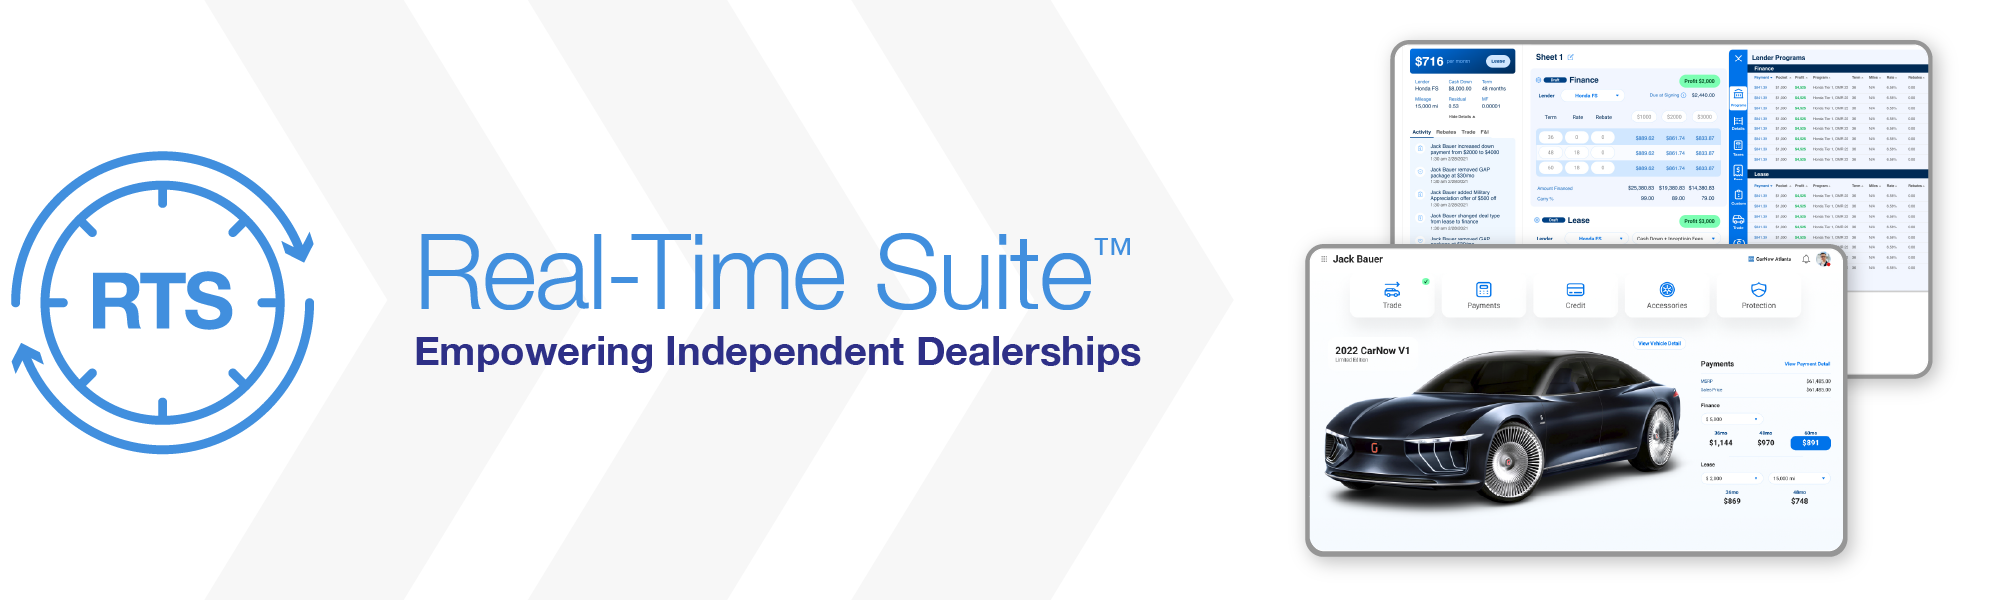 Real-Time Suite™, Empowering Independent Dealerships